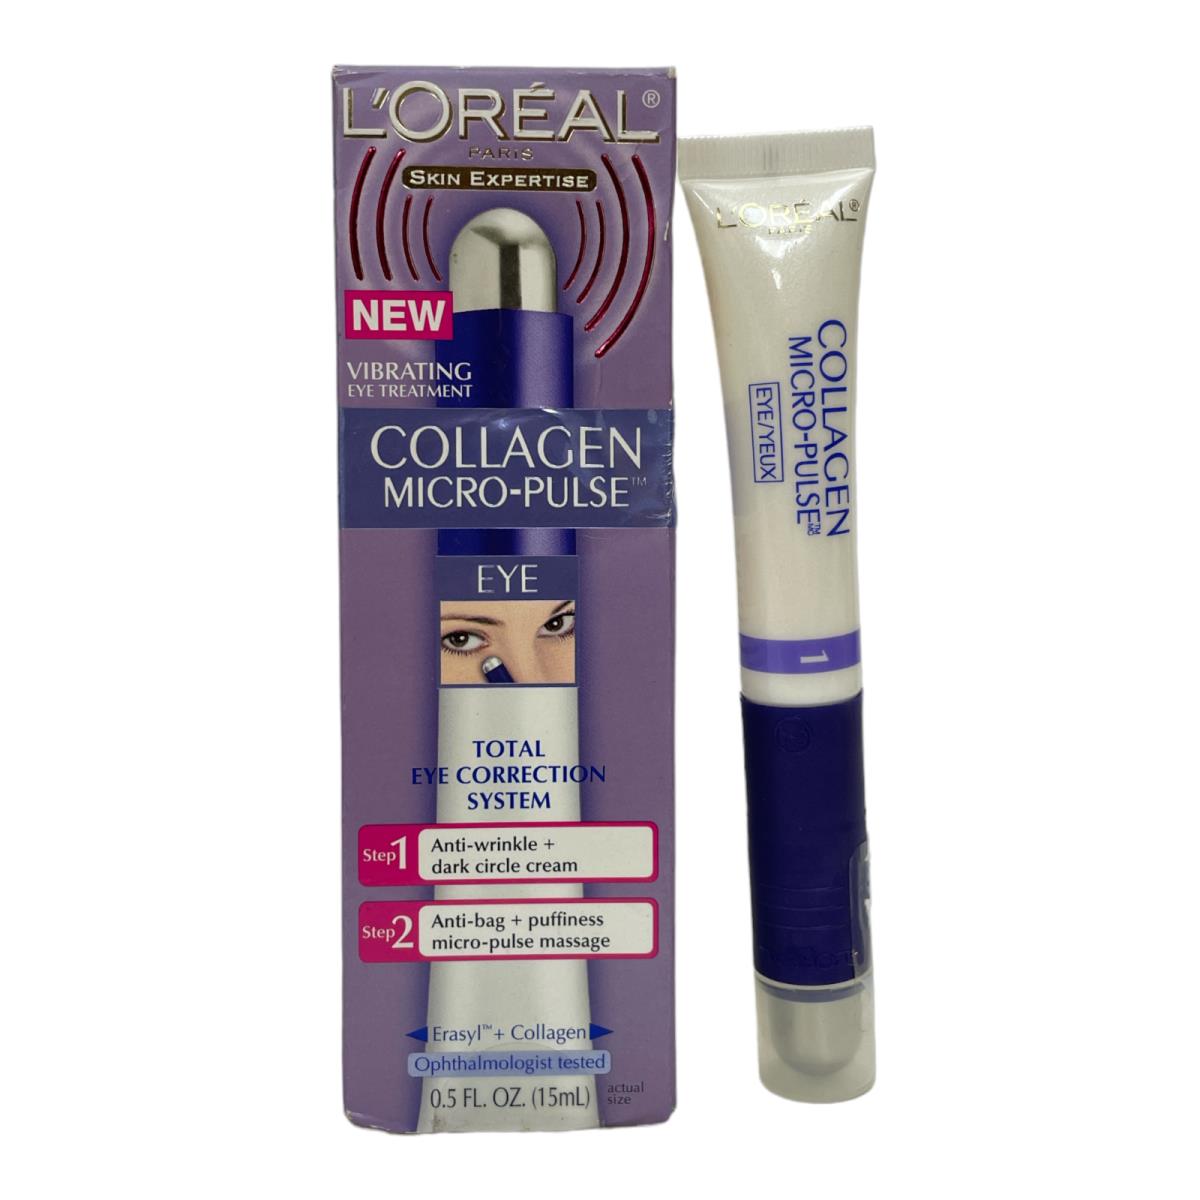 Loreal Collagen Micro-pulse Eye Correcting System 0.5fl/15ml As Seen In Pics